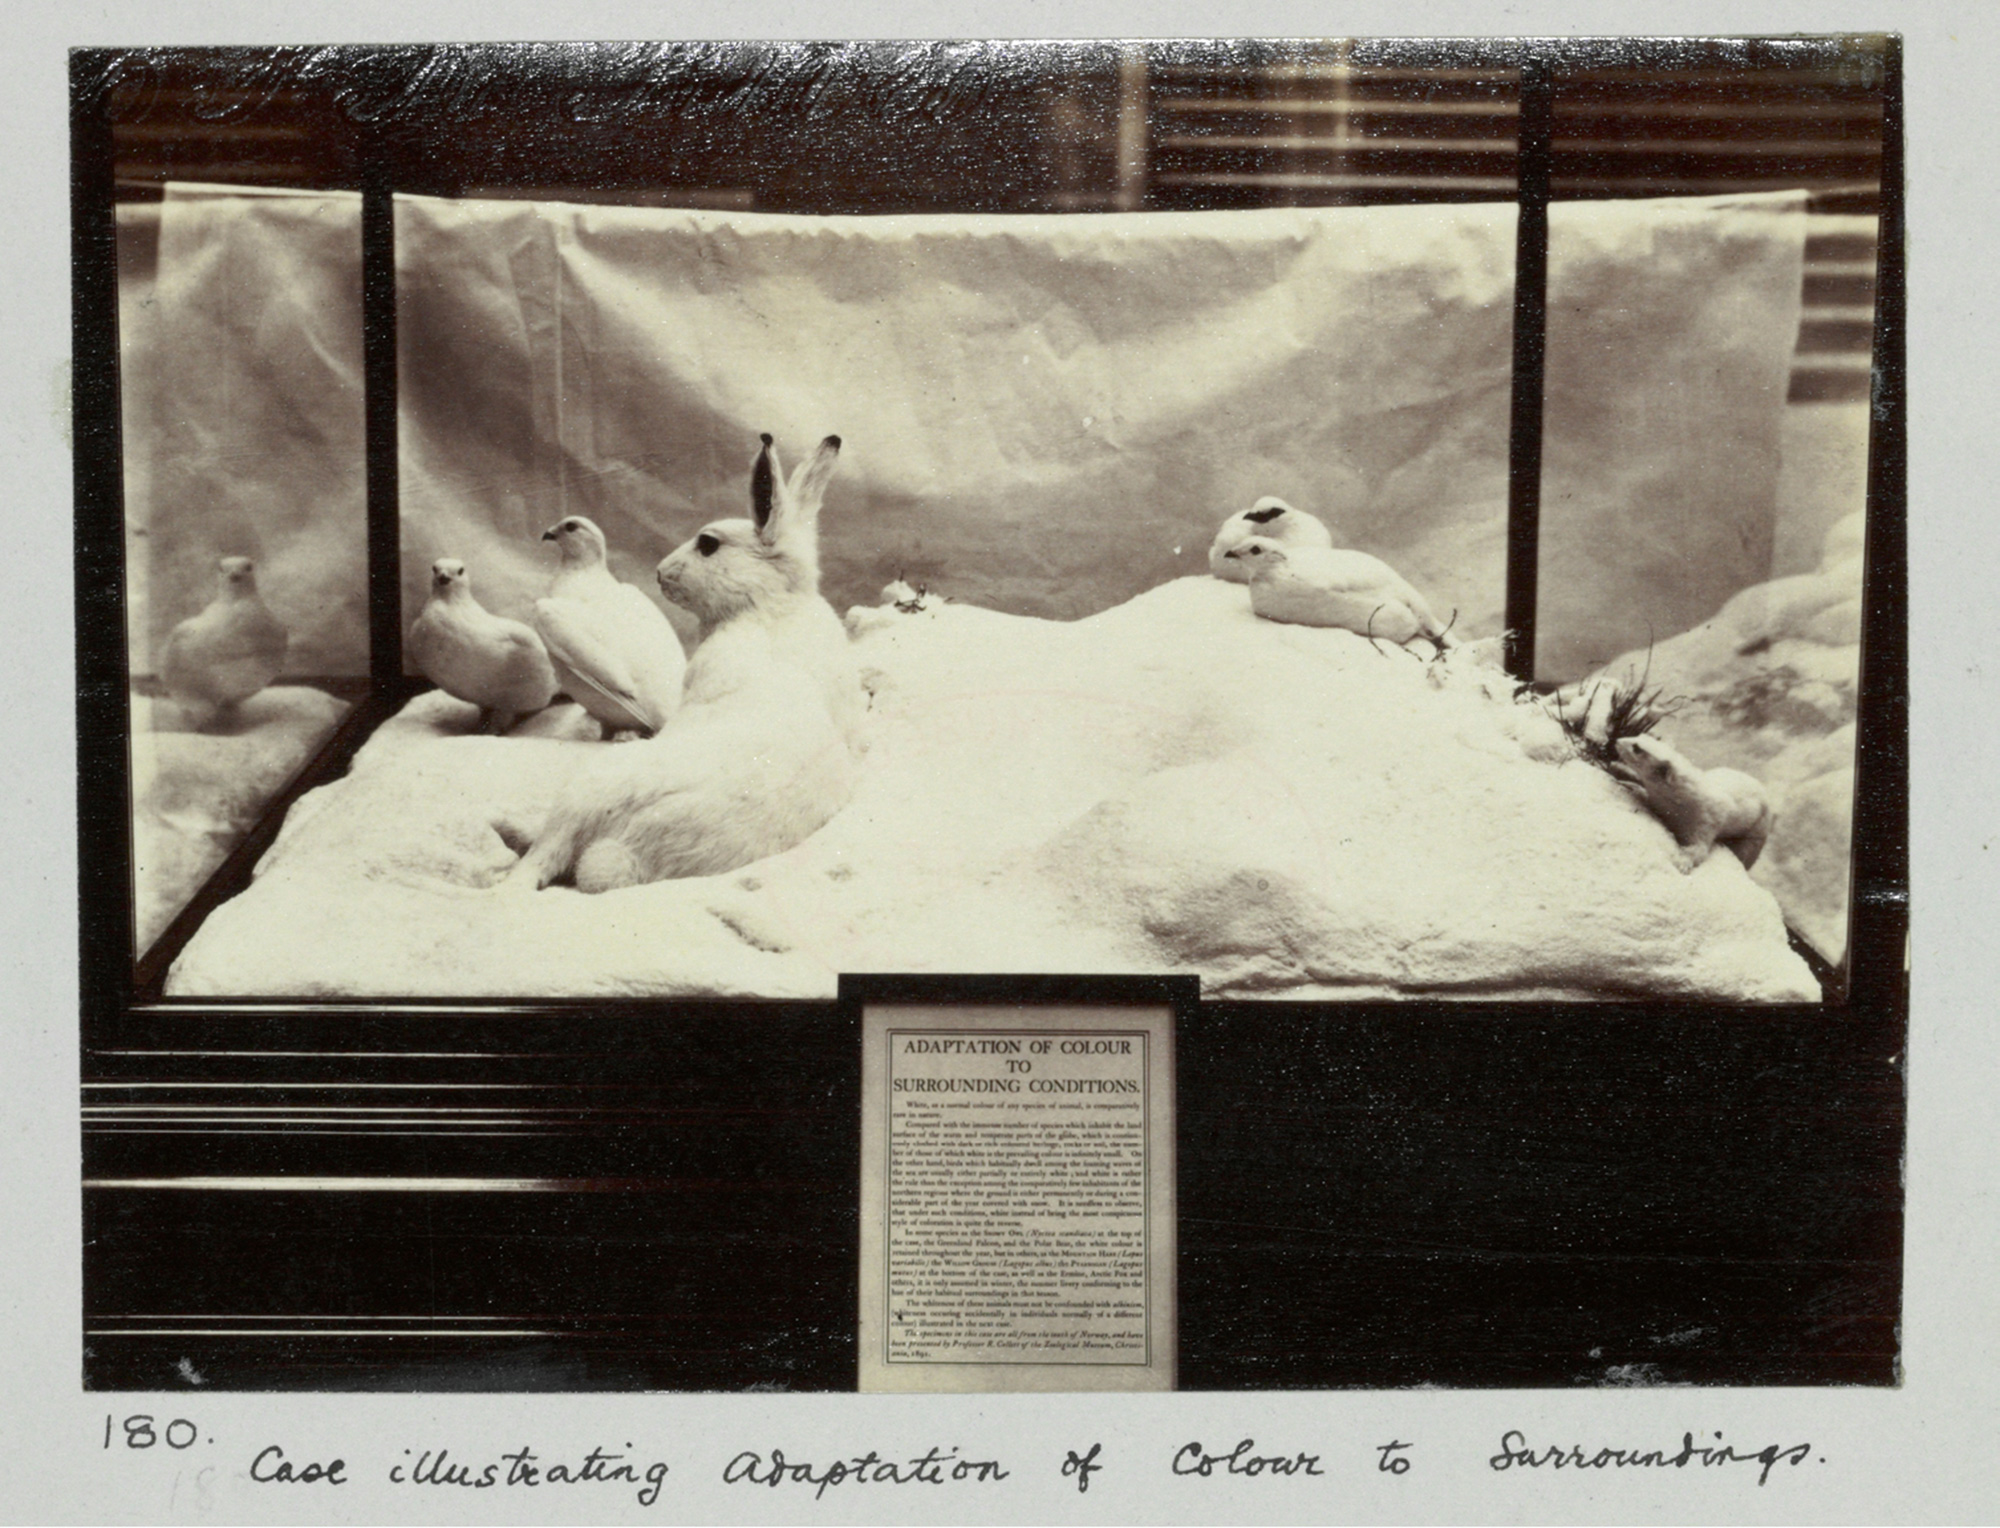 A case created by Henry Flower for London’s Natural History Museum. It features white rabbits on snow, demonstrating the “adaptation of colour to surroundings.”